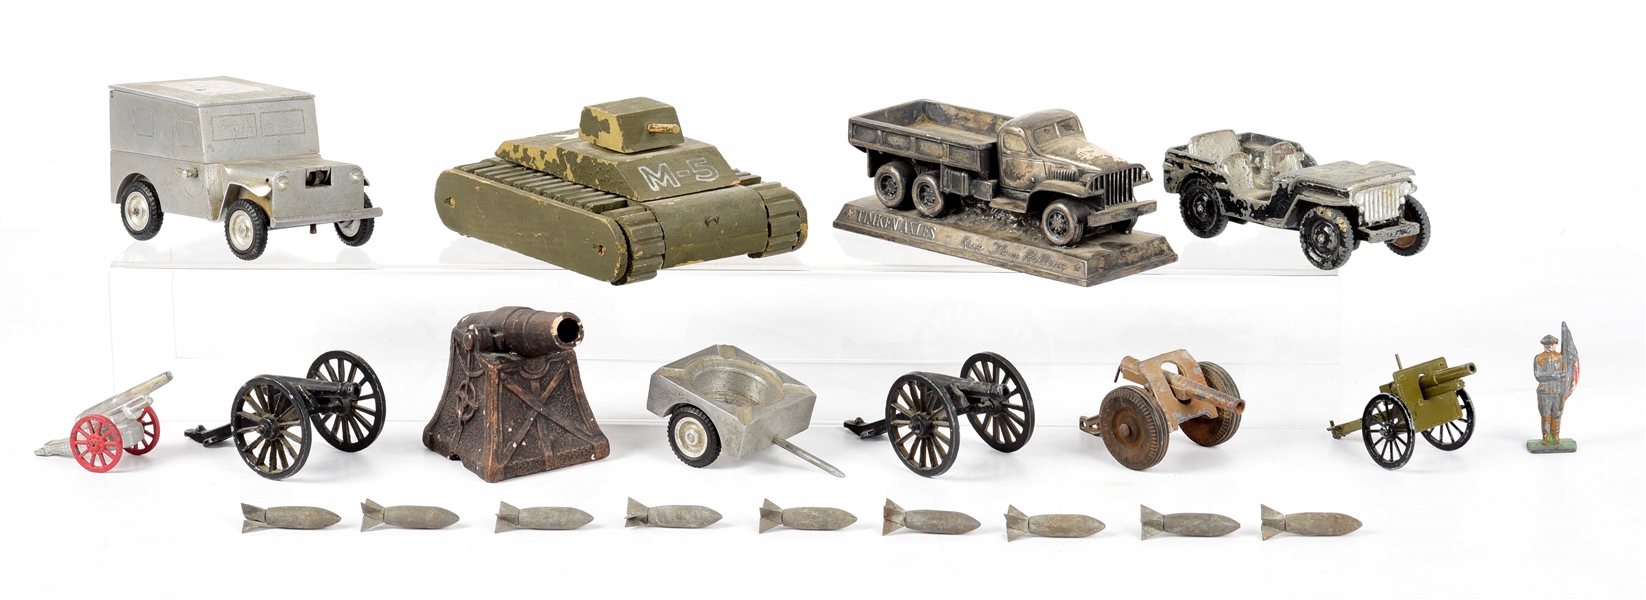 LOT OF VARIOUS WWII ERA MODEL VEHICLES AND CANNONS.